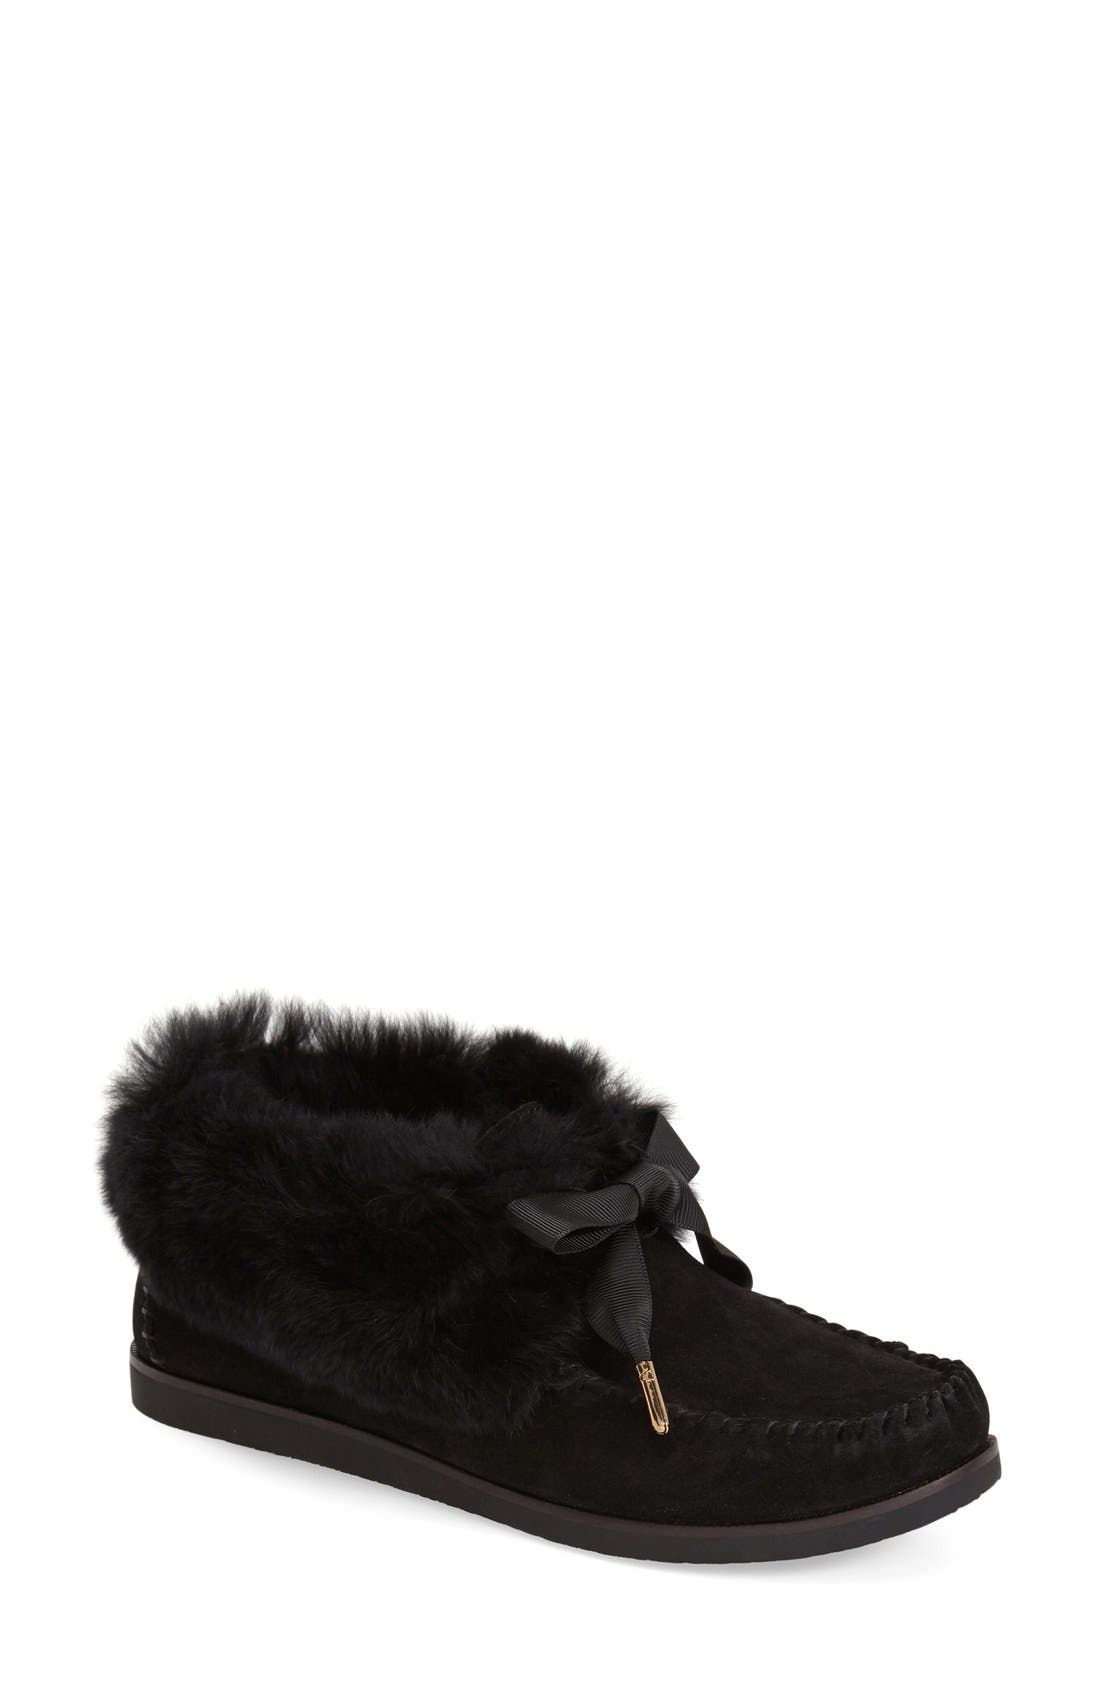 tory burch fur lined boots